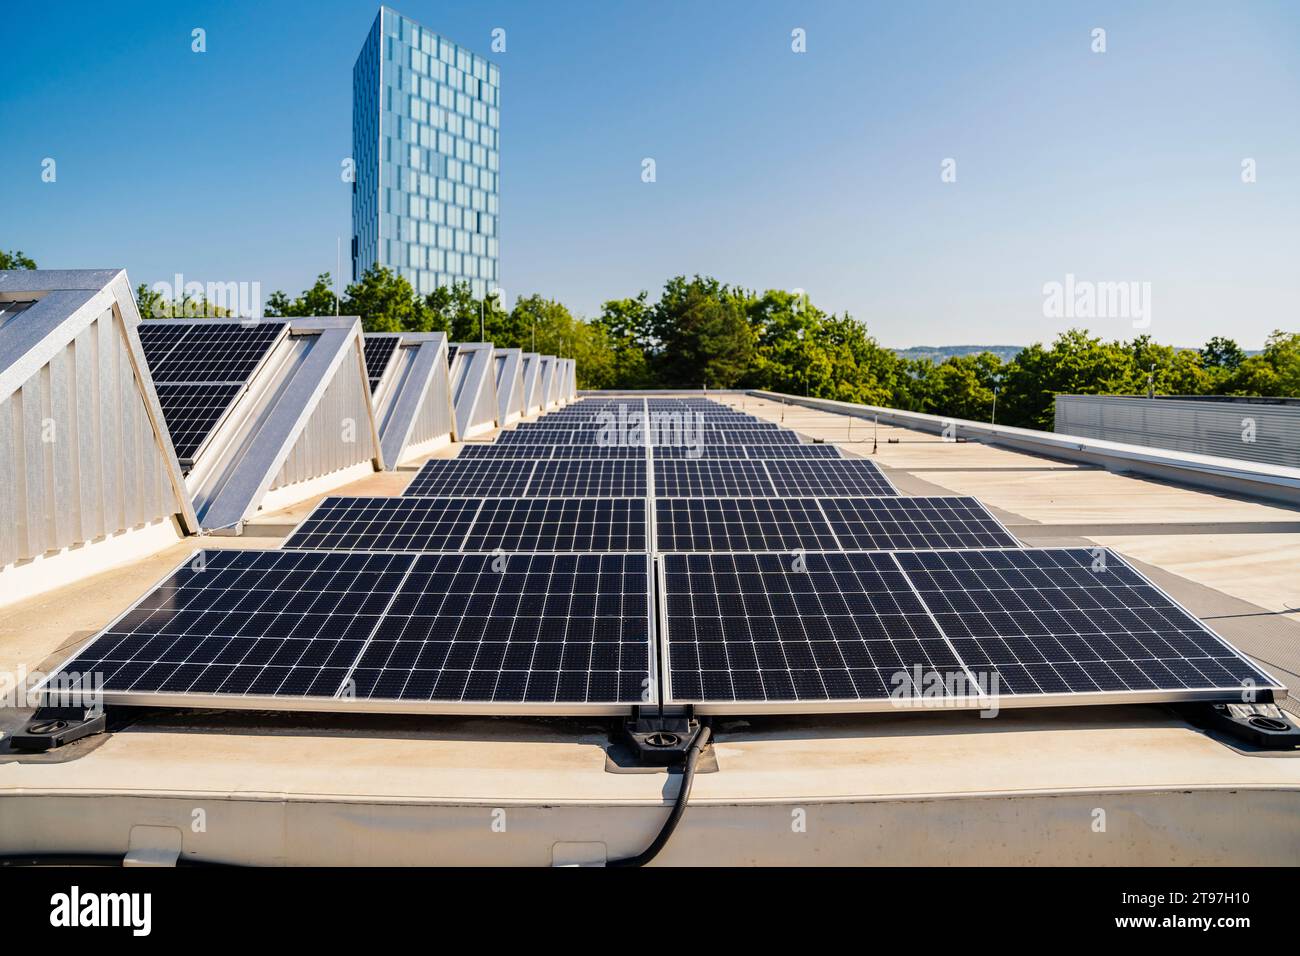 Solar panels installed on a rooftop, generating clean energy under a clear blue sky Stock Photo